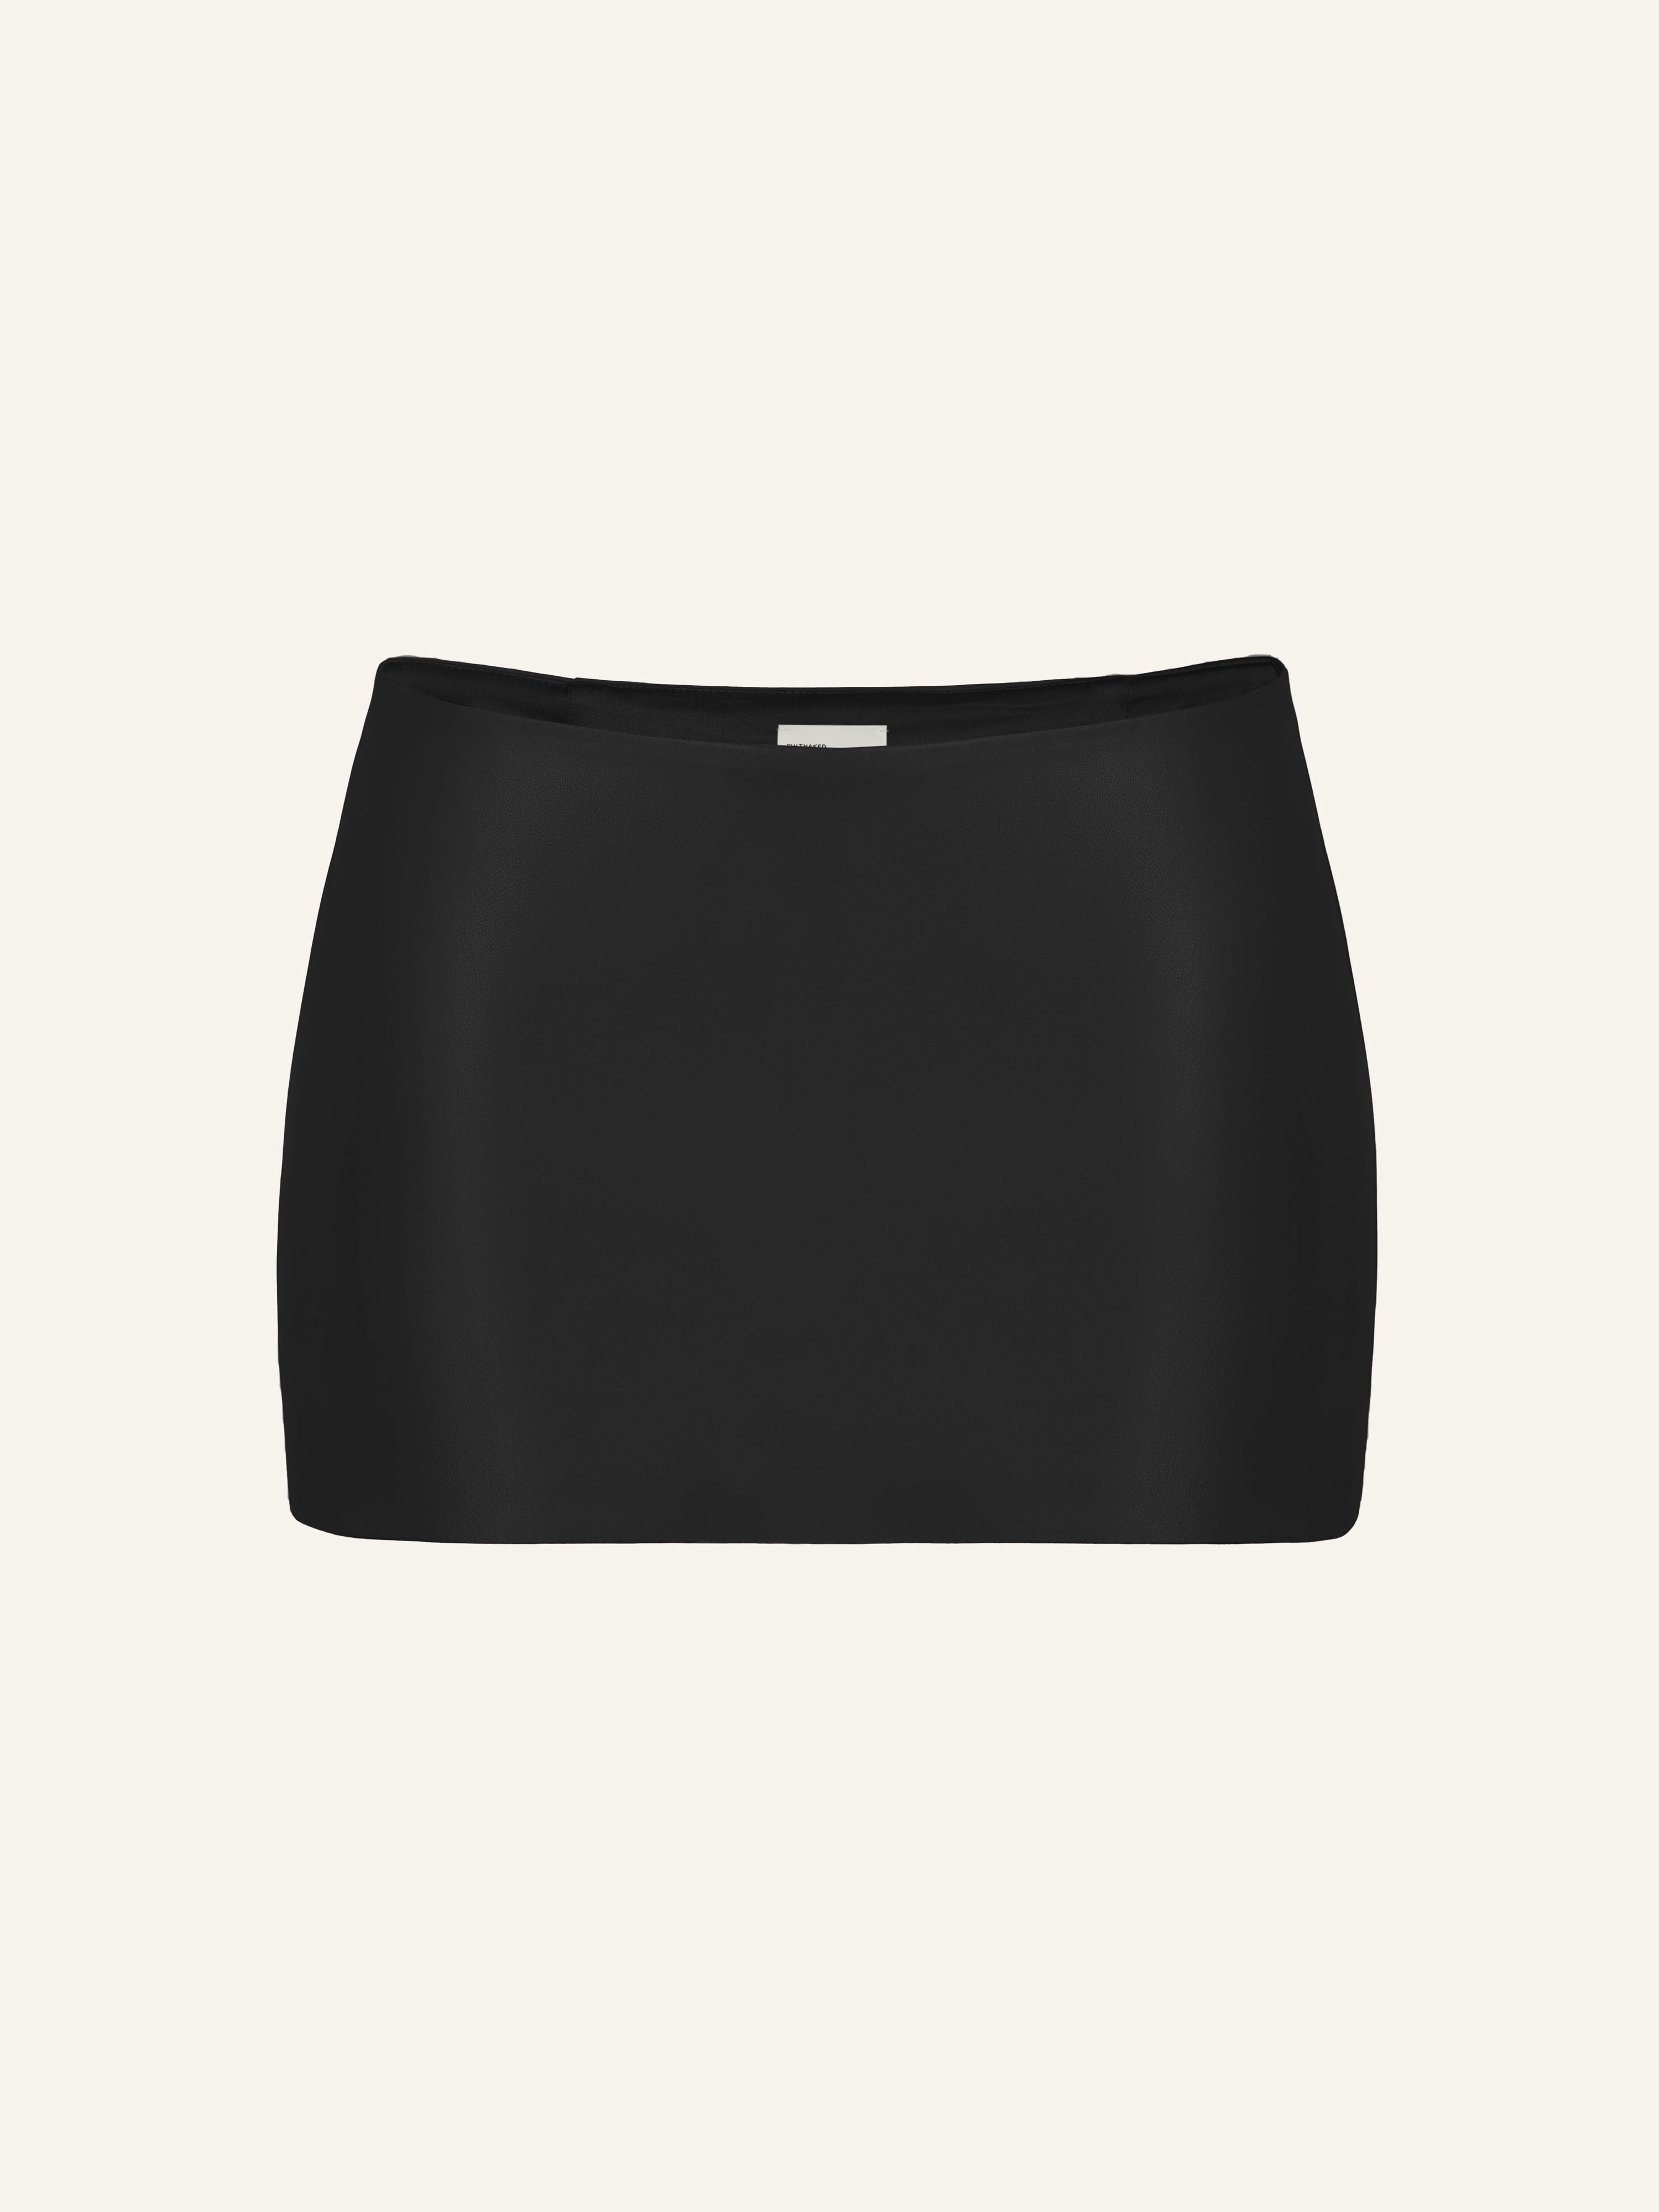 Product photography of a black vegan leather low rise mini skort